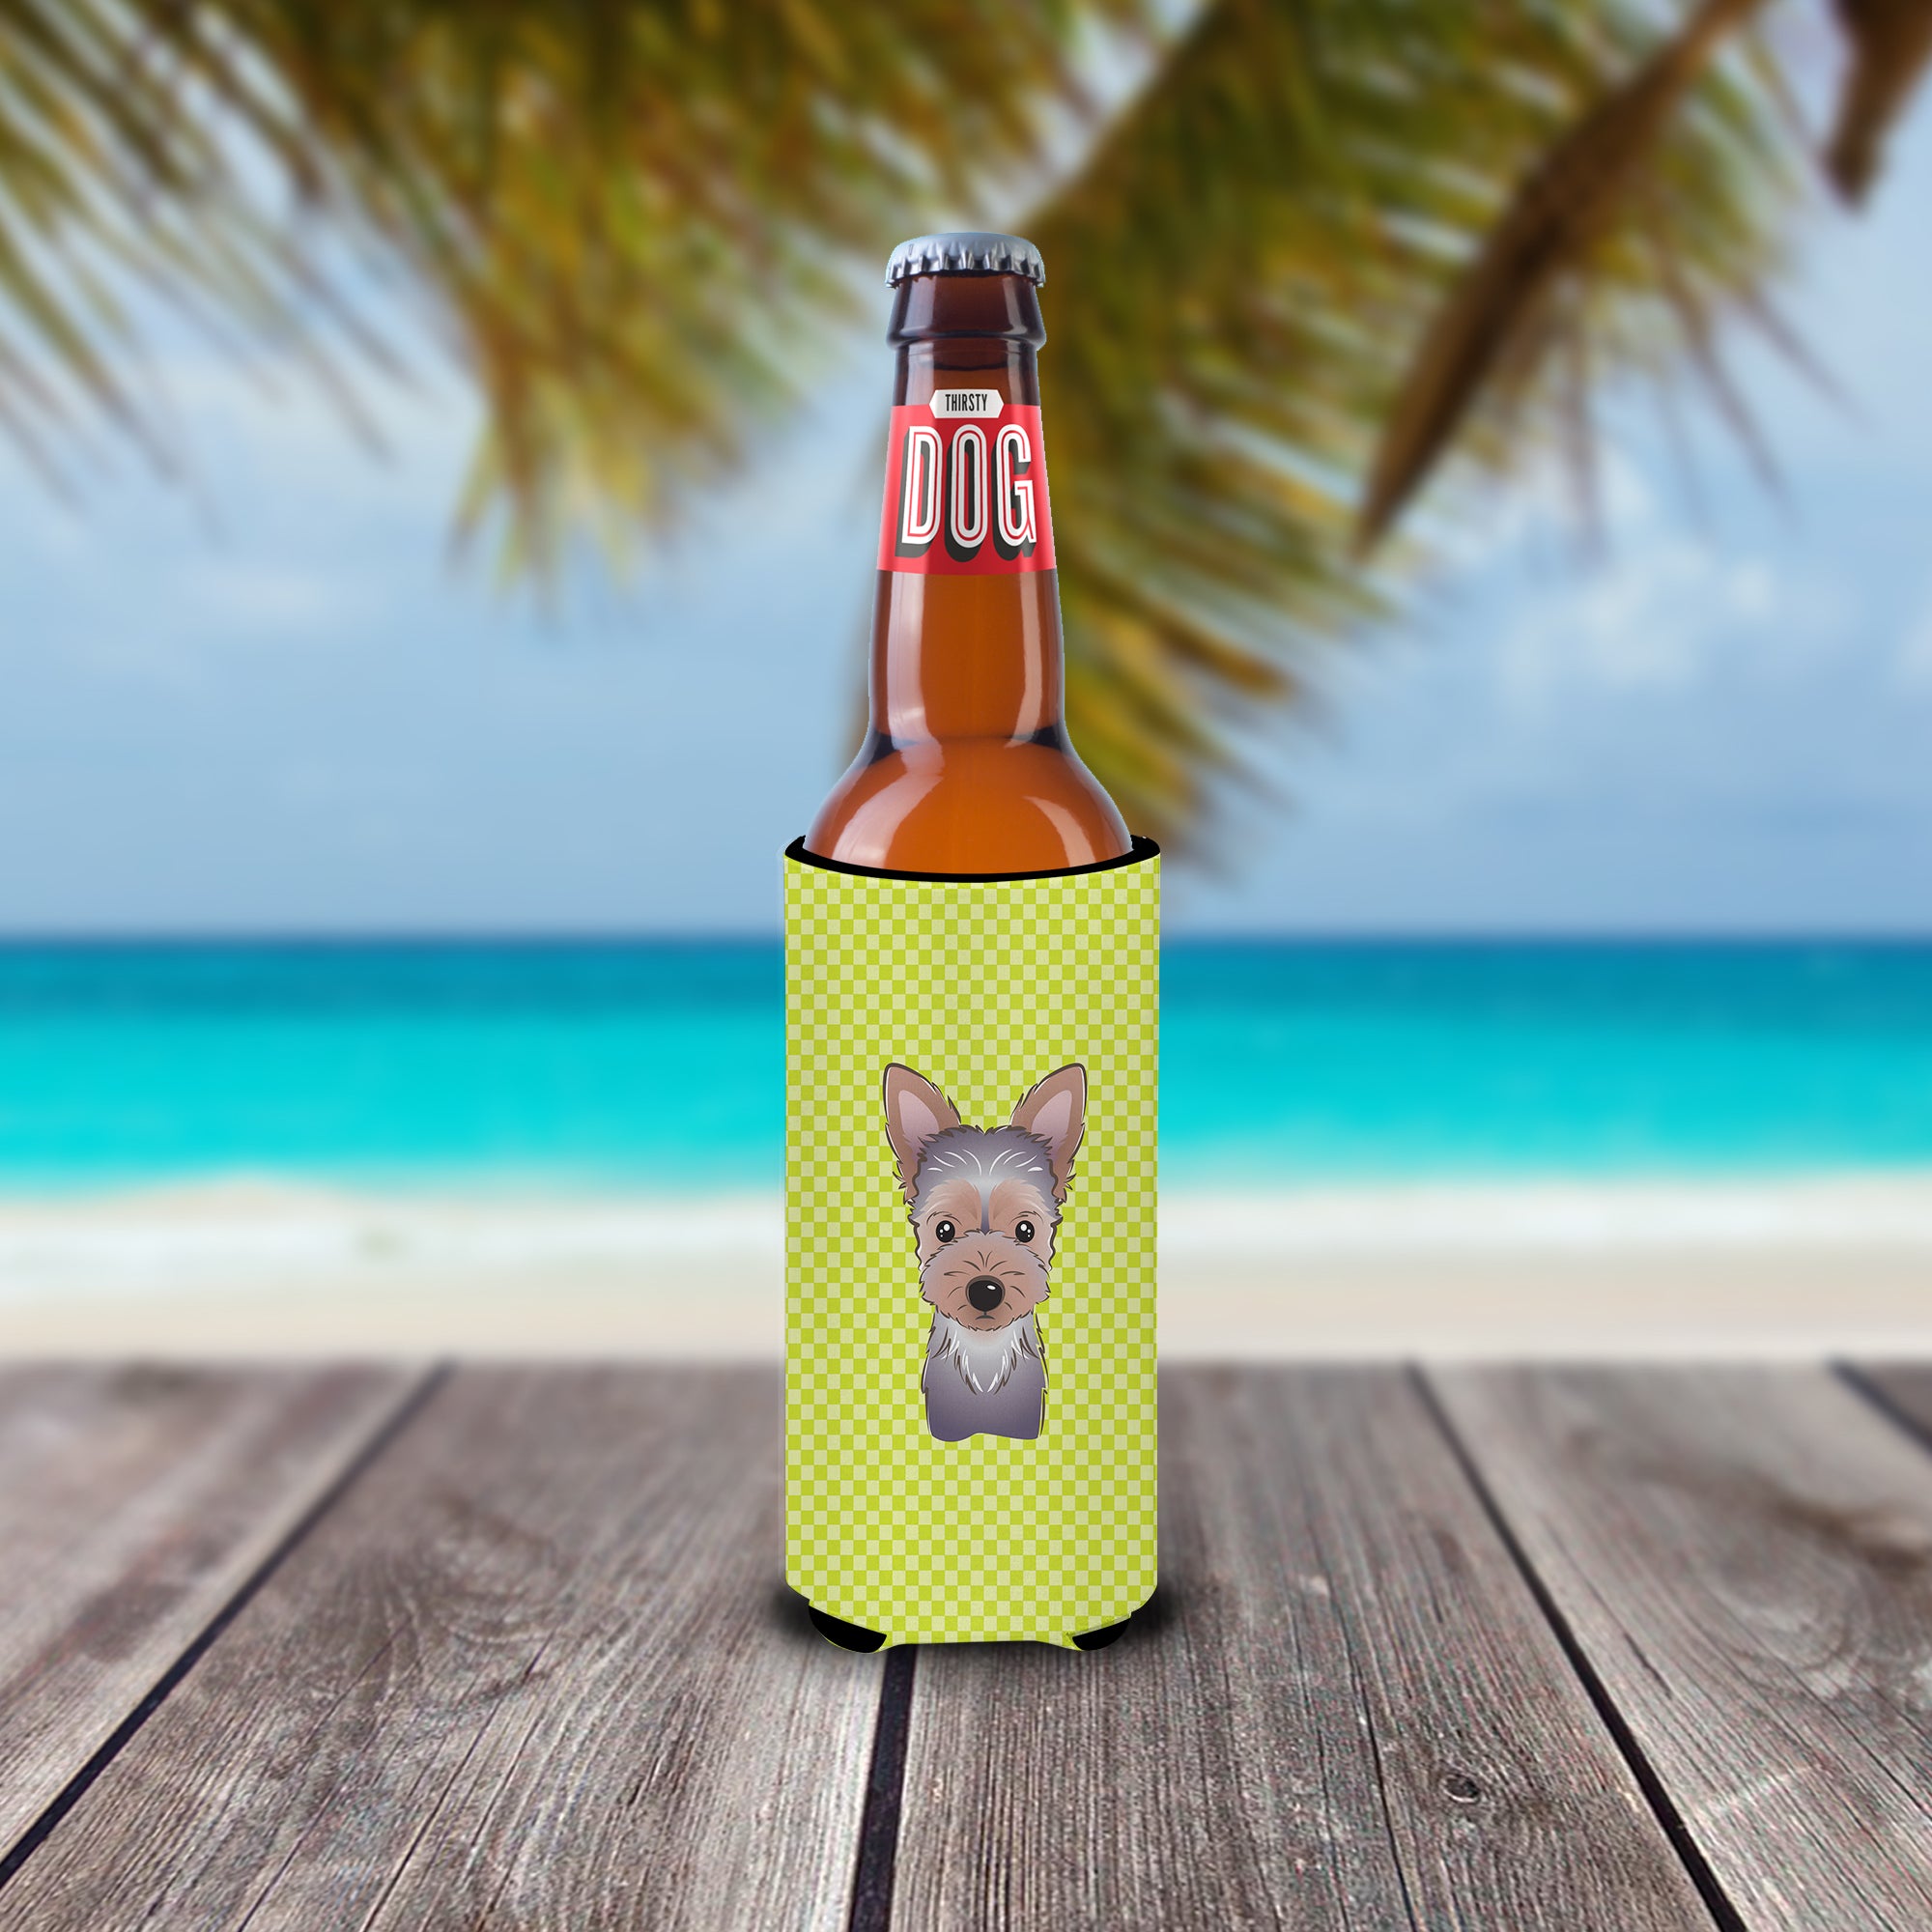 Checkerboard Lime Green Yorkie Puppy Ultra Beverage Insulators for slim cans